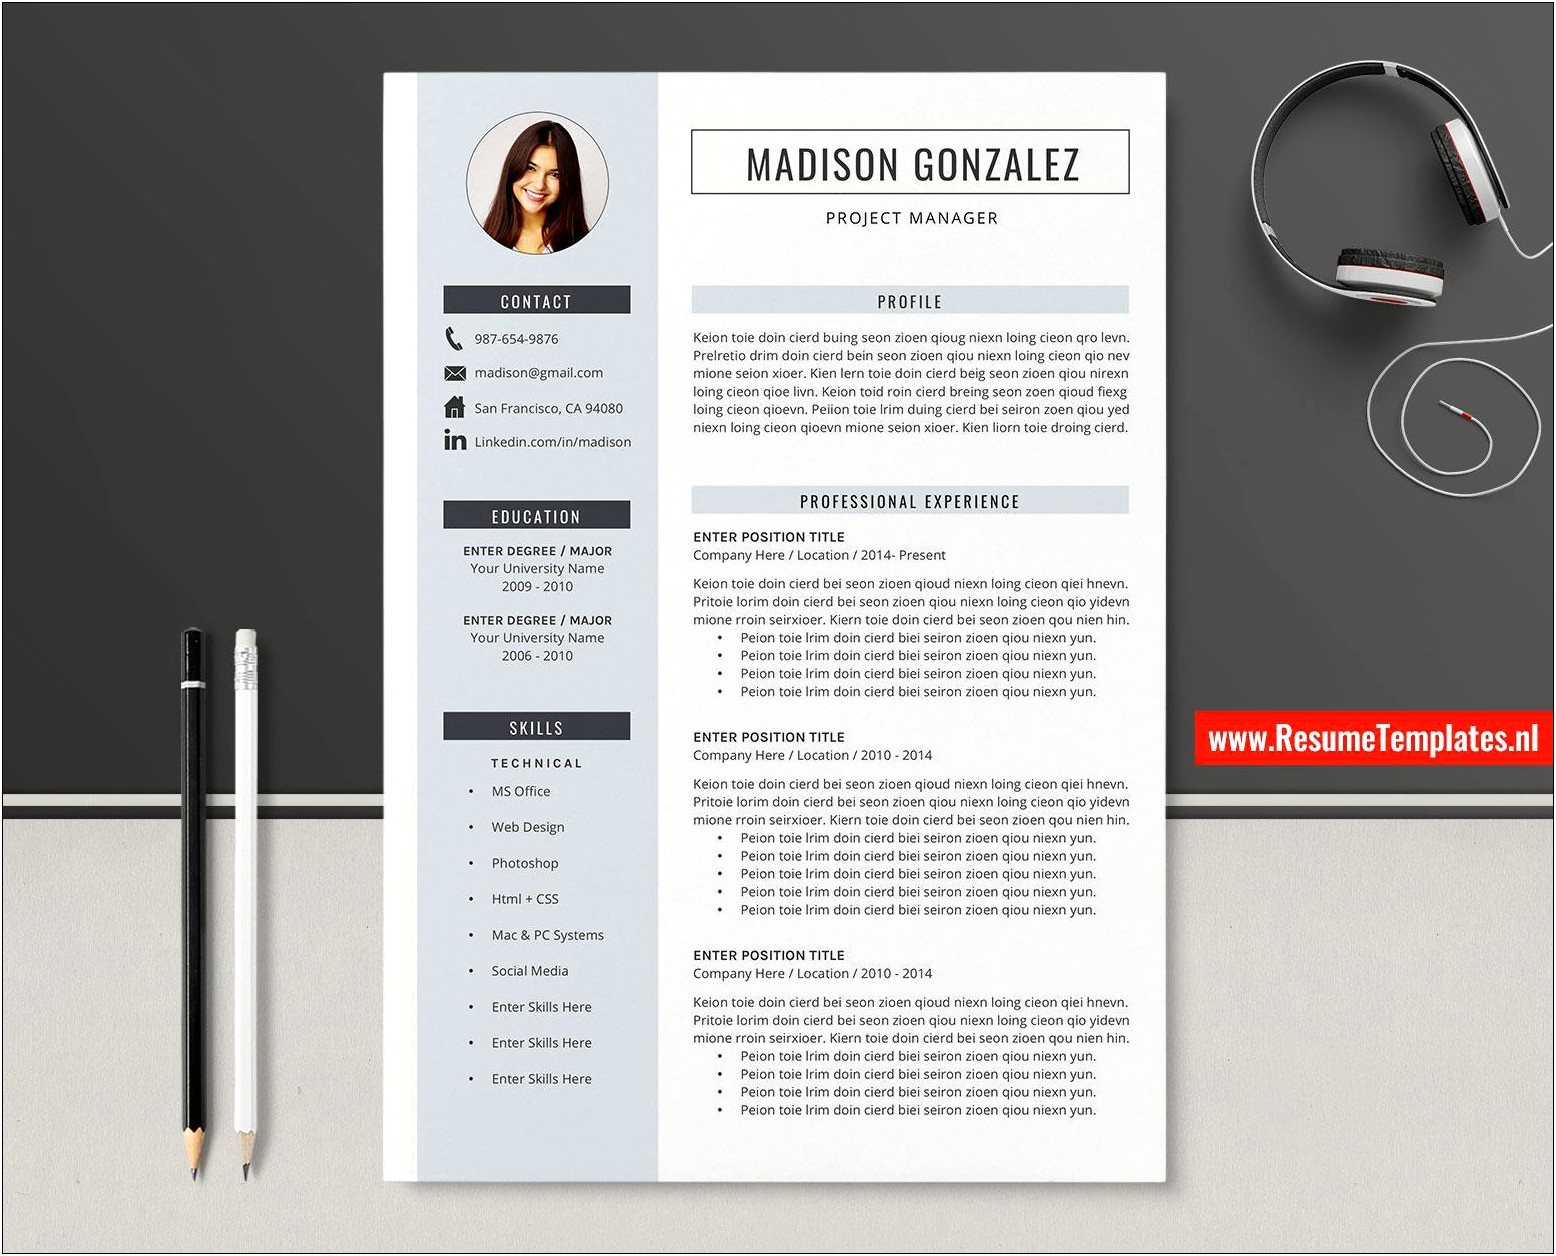 Ms Office Word 2010 Resume Templates